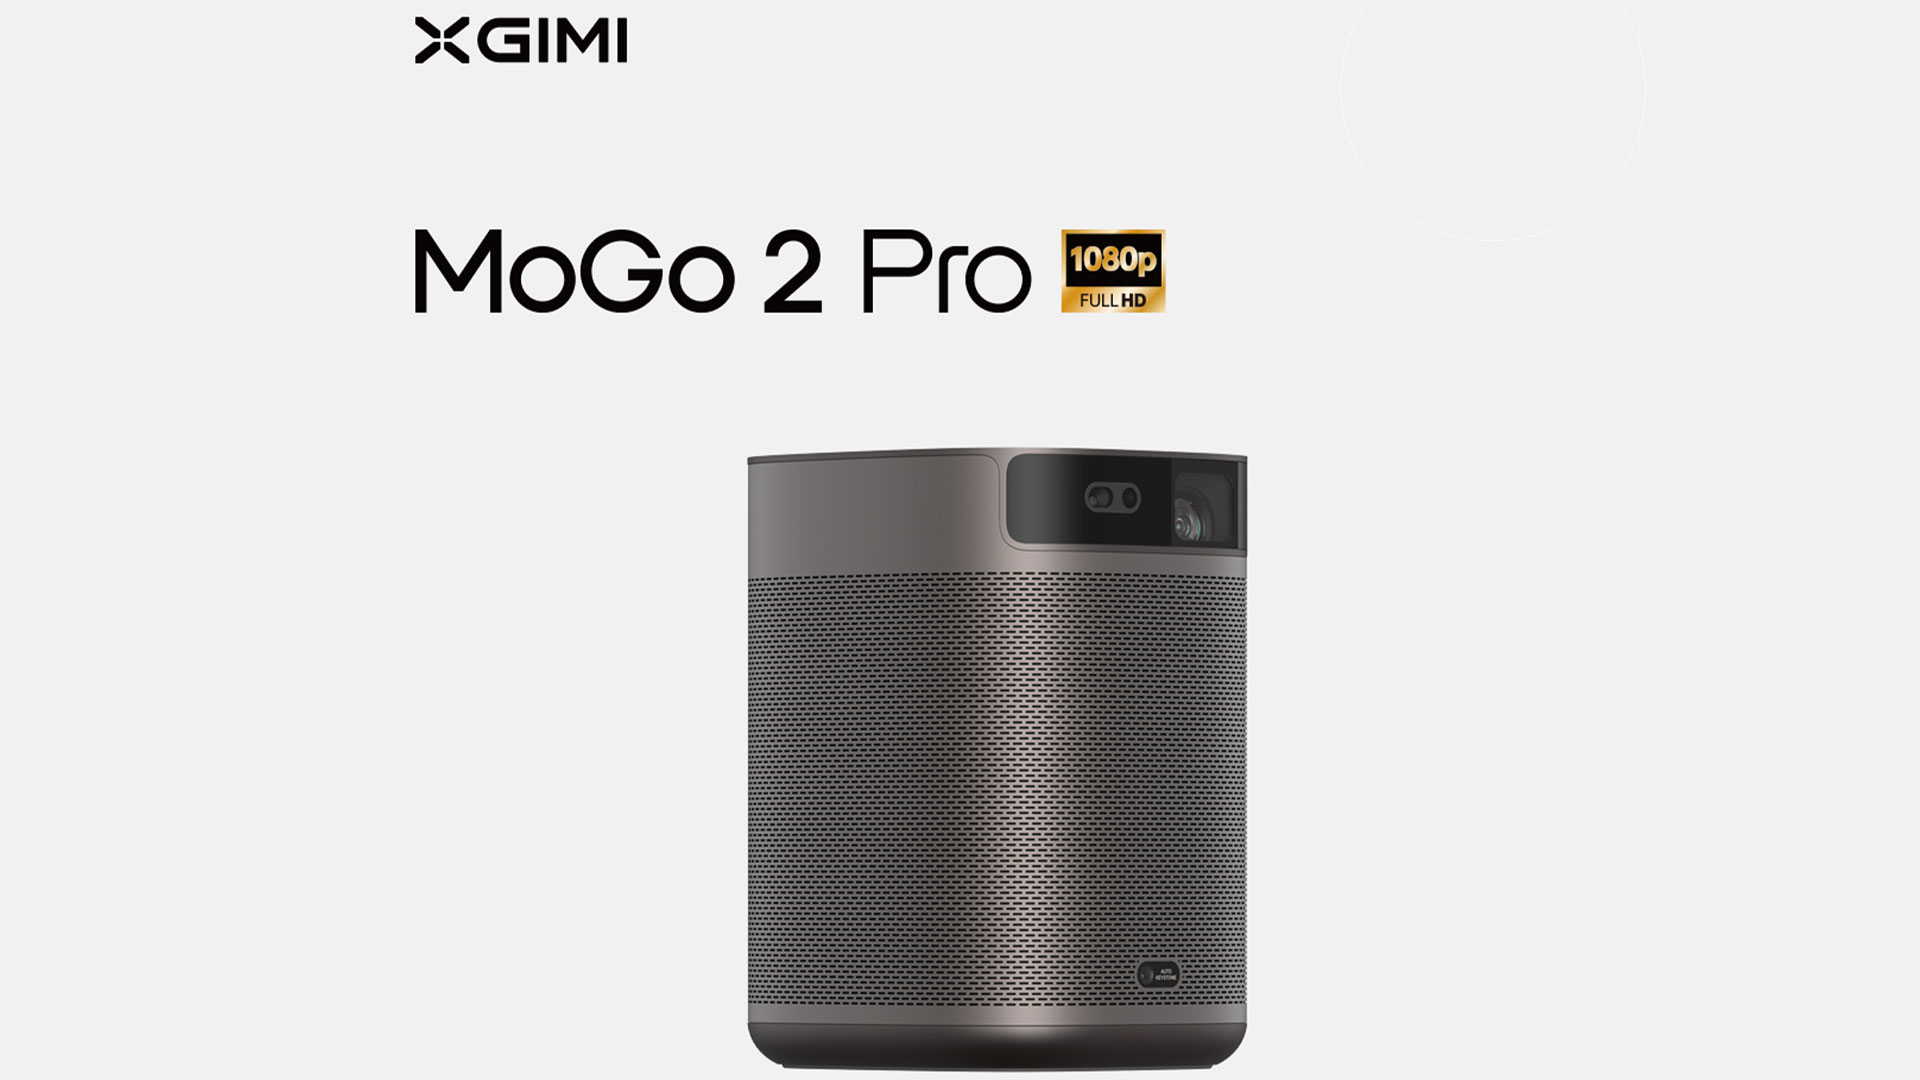 XGIMI-MoGo-2-Pro-1080p-Full-HD-Image - Projector Reviews - Image